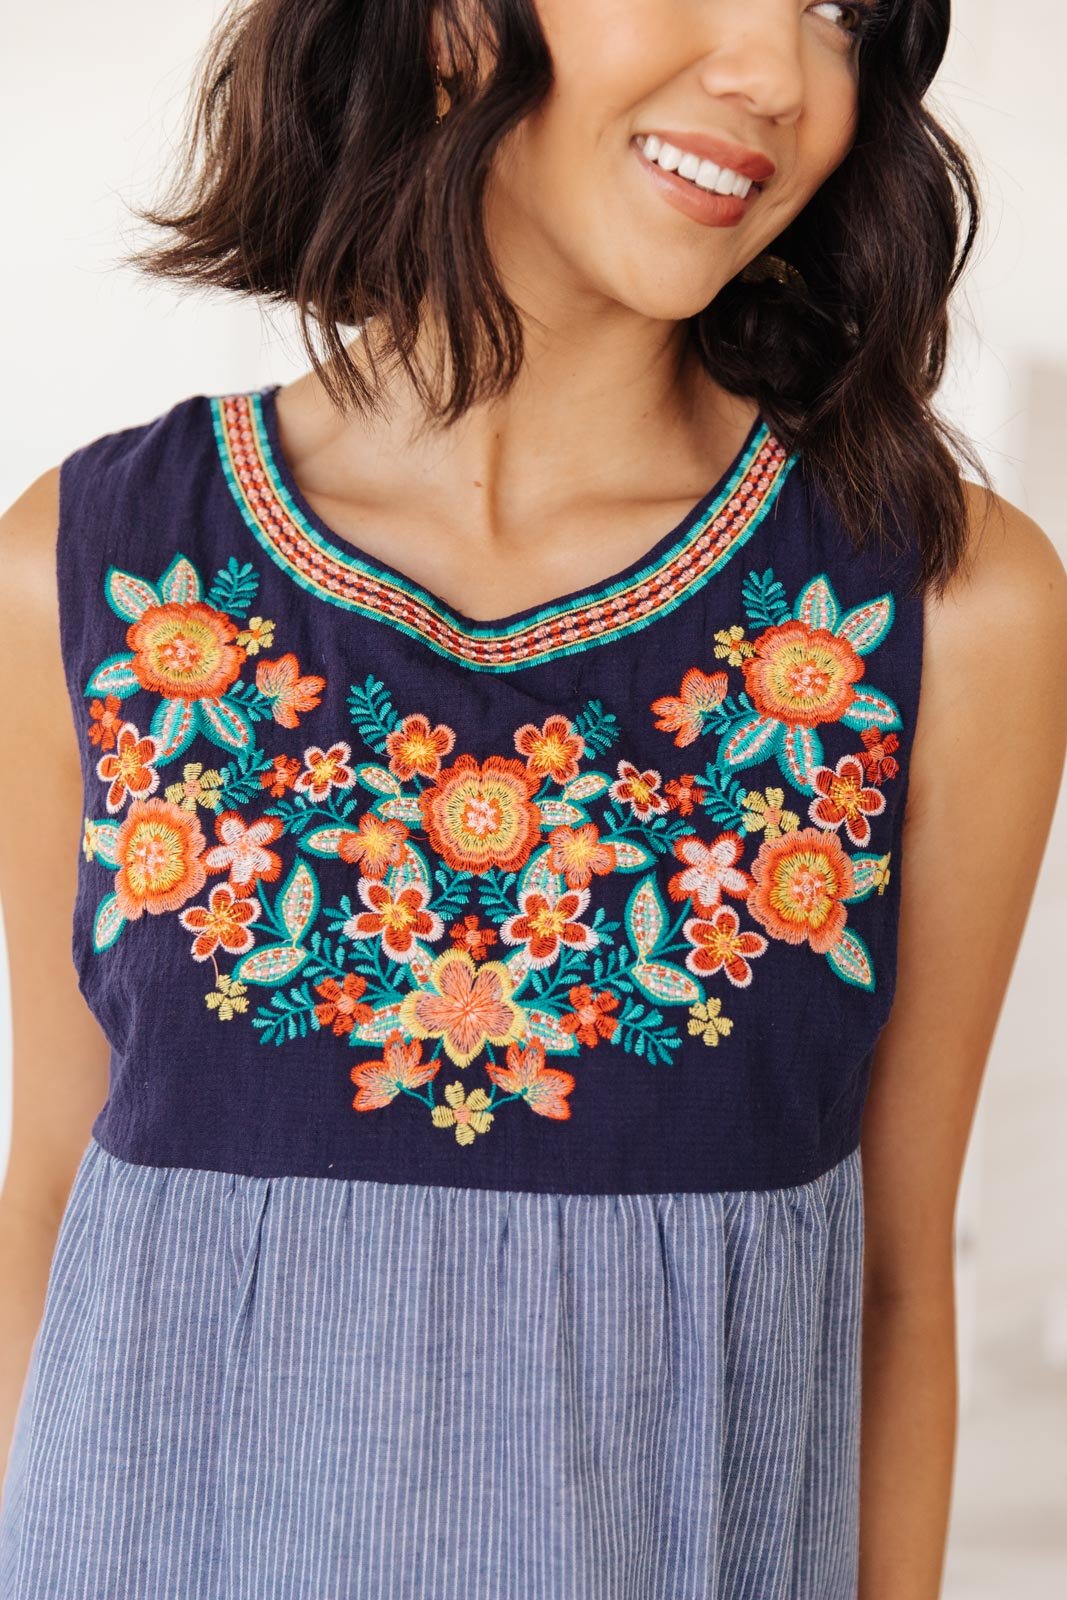 Harmony Top in Blue